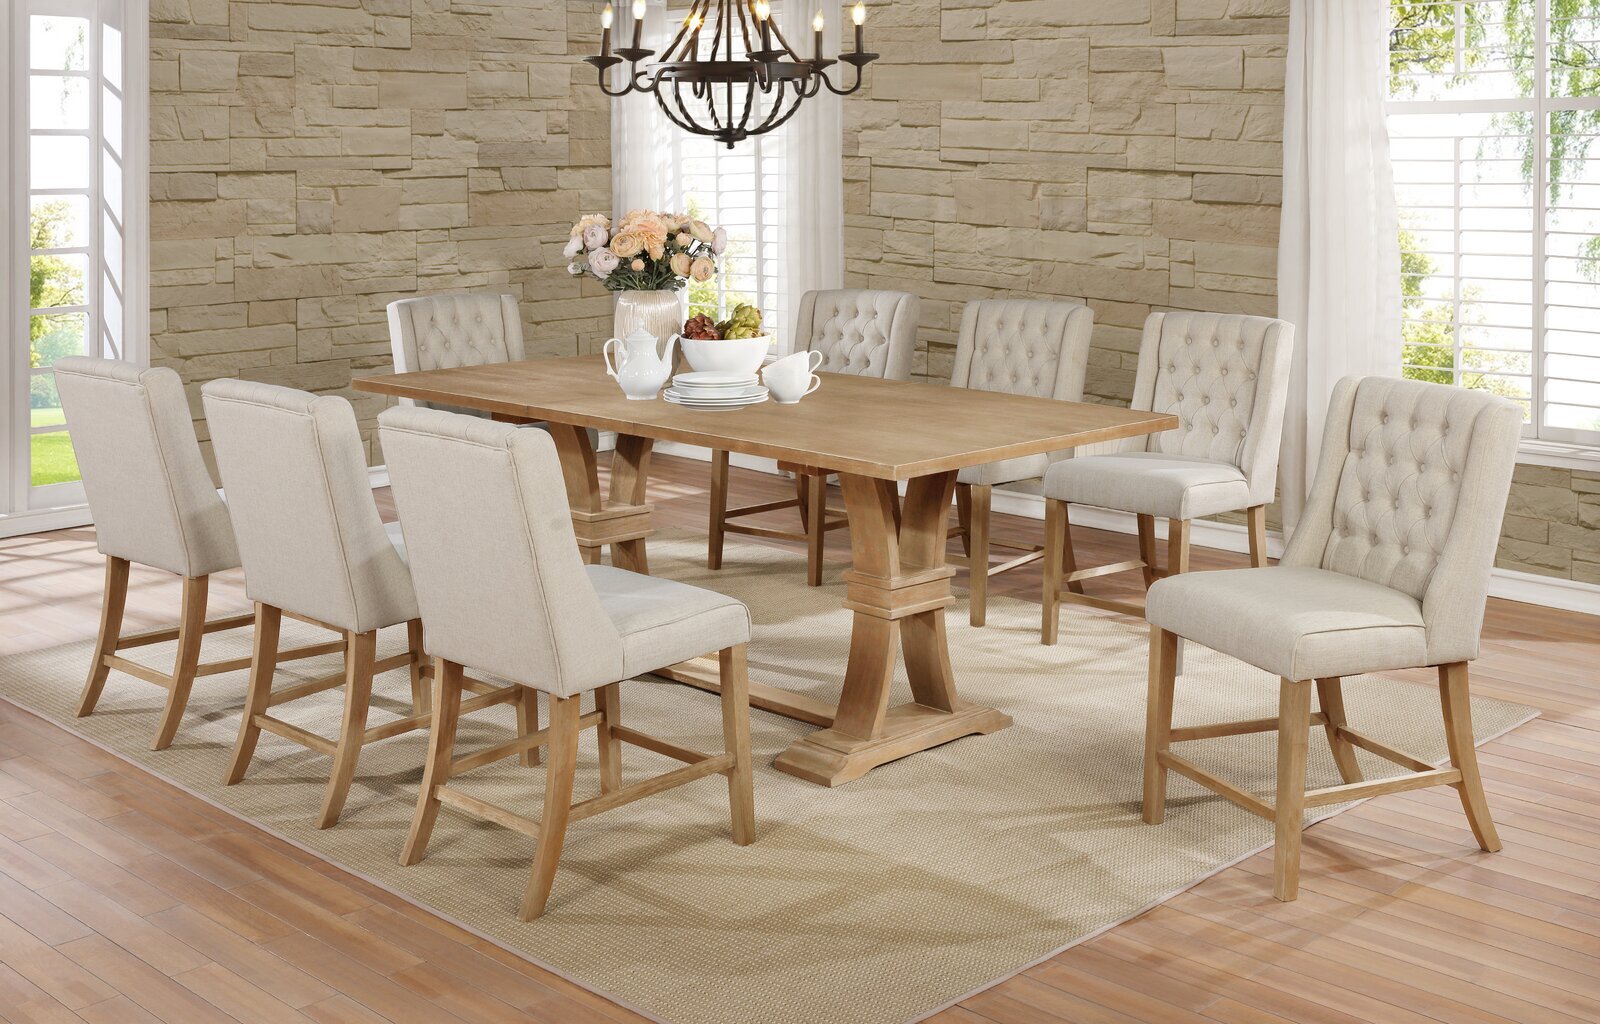 8 person counter height dining table with upholstered chairs